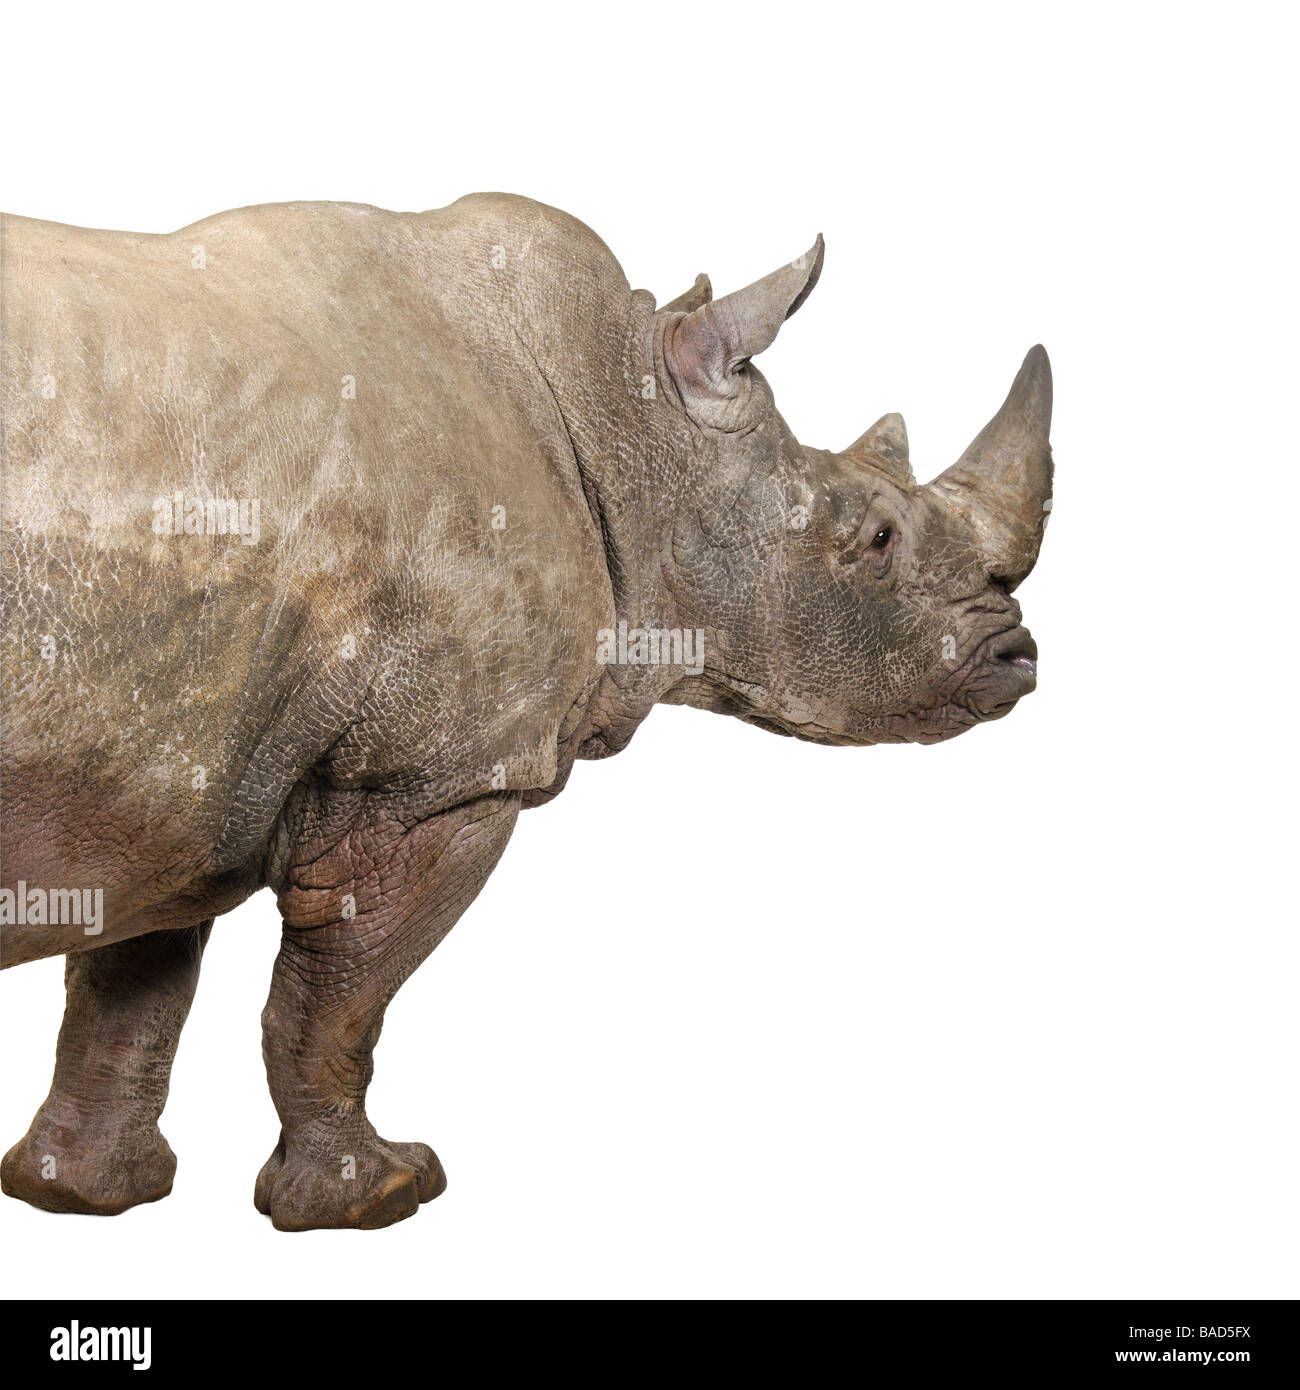 White Rhinoceros or Square lipped rhinoceros Ceratotherium simum 10 years in front of a white background Stock Photo